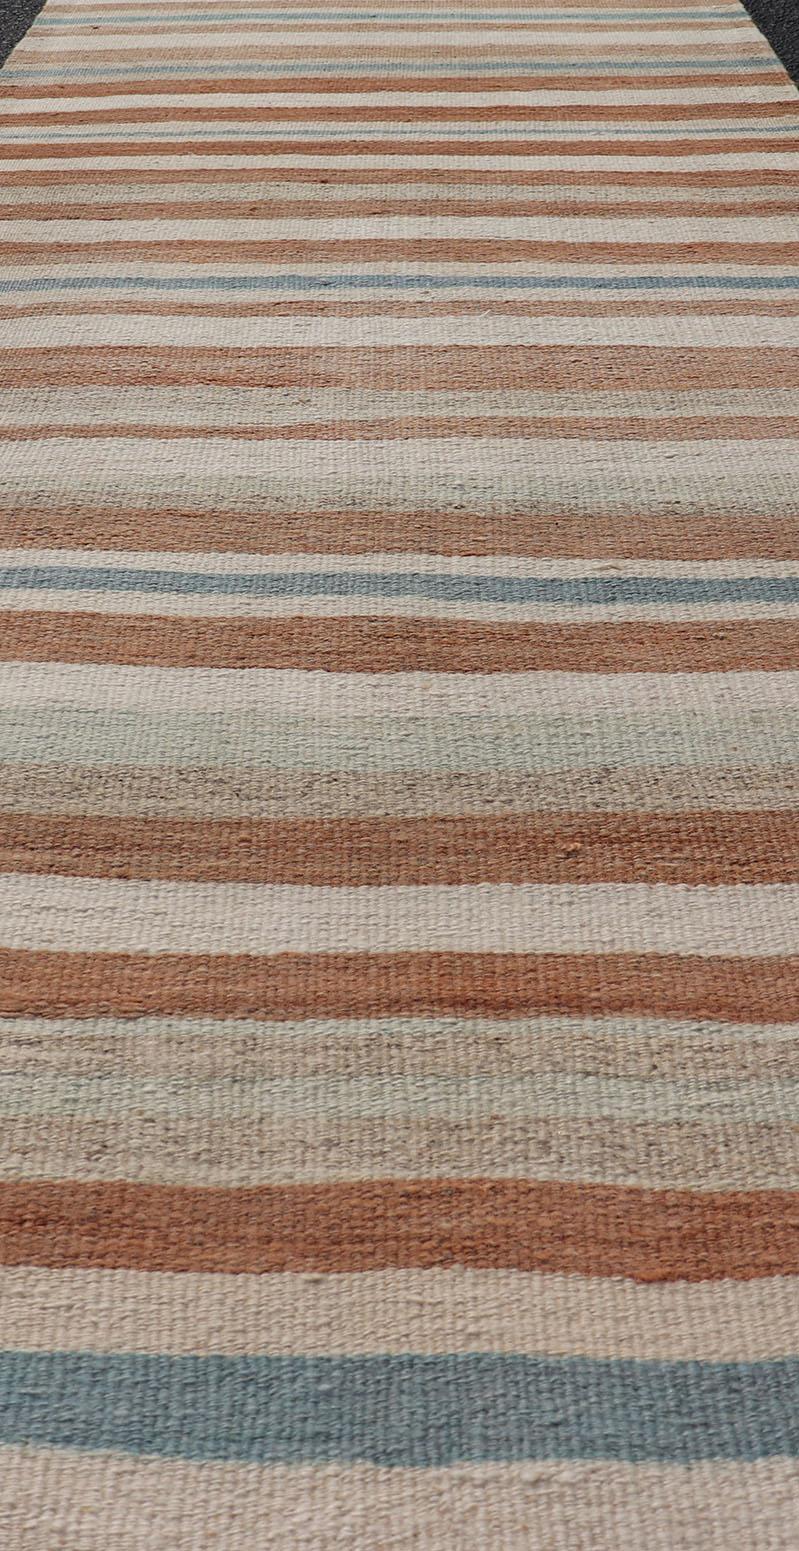 Striped Vintage Turkish Kilim Runner in Shades of Brown, Cream, and Blue For Sale 2